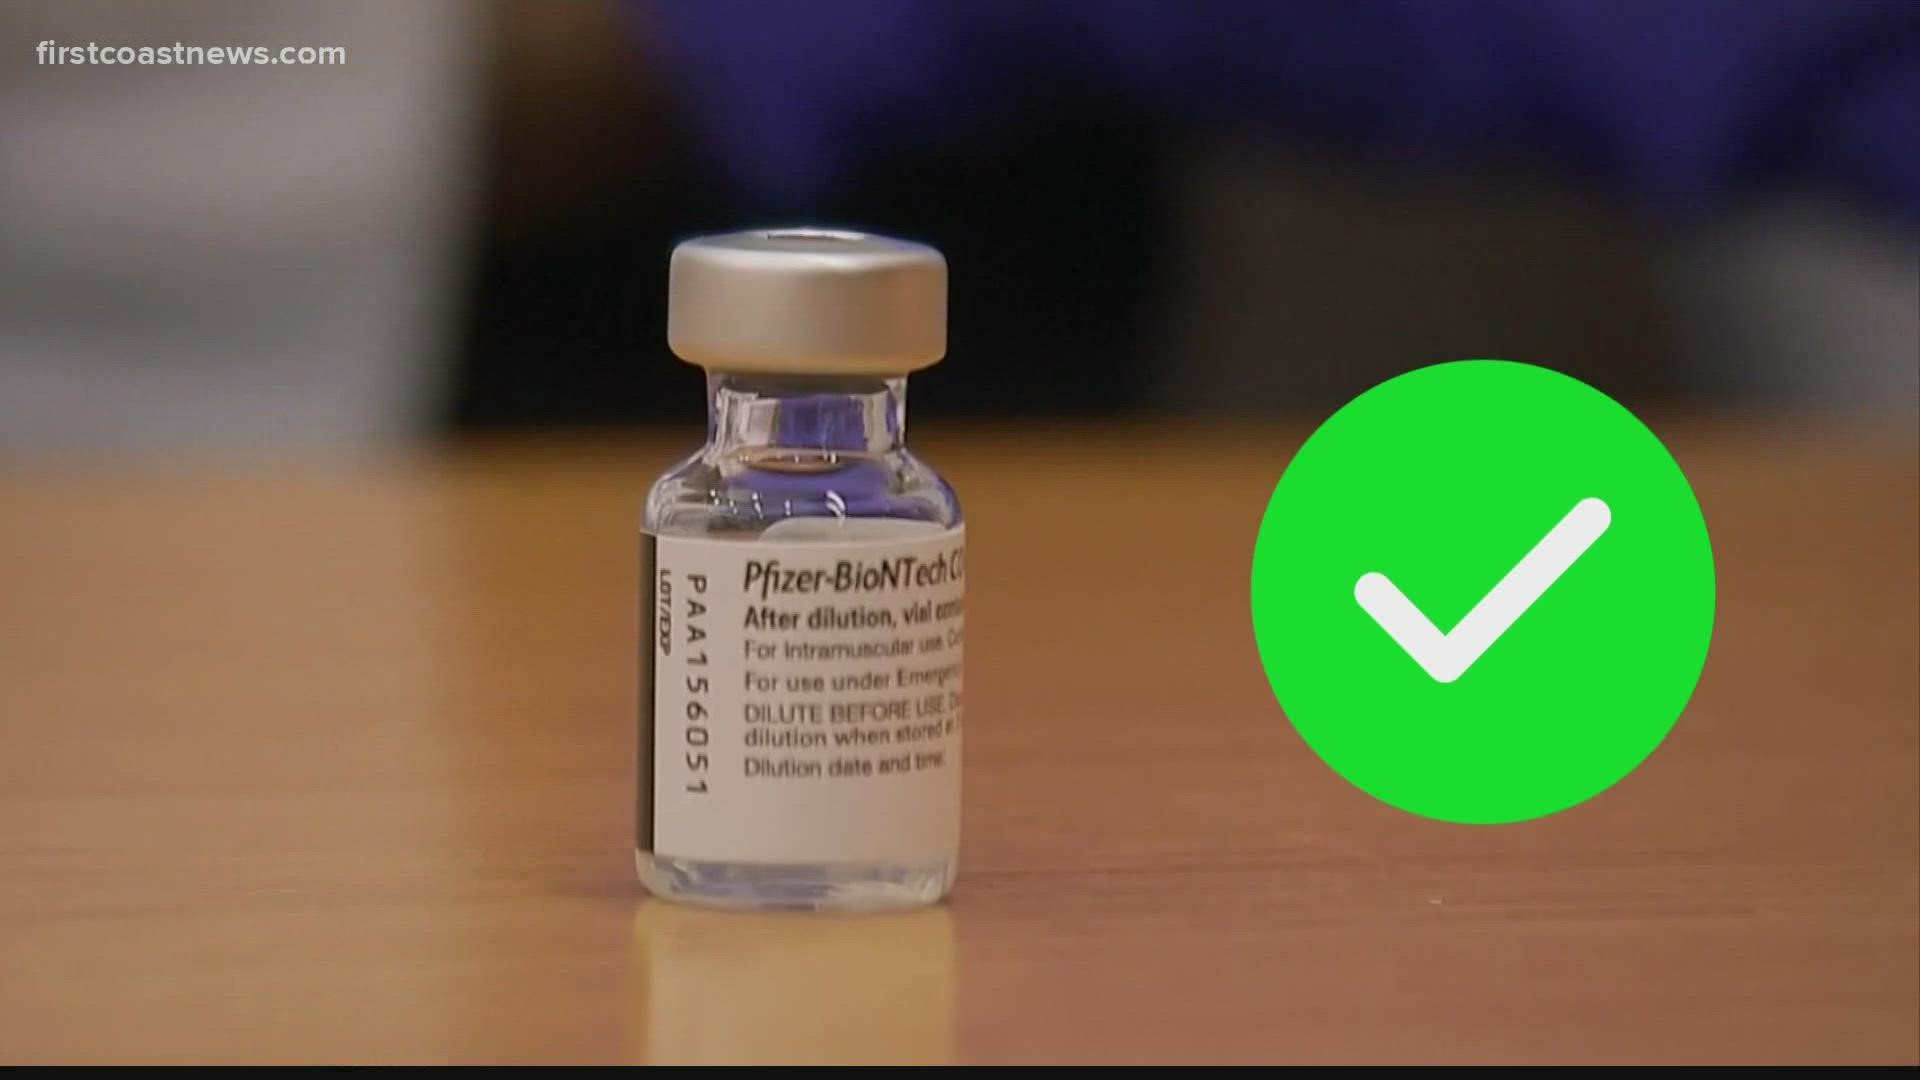 Dr. Michael Koren, who heads up local vaccine trials, is calling this a ‘tremendous’ step in the fight against COVID-19.